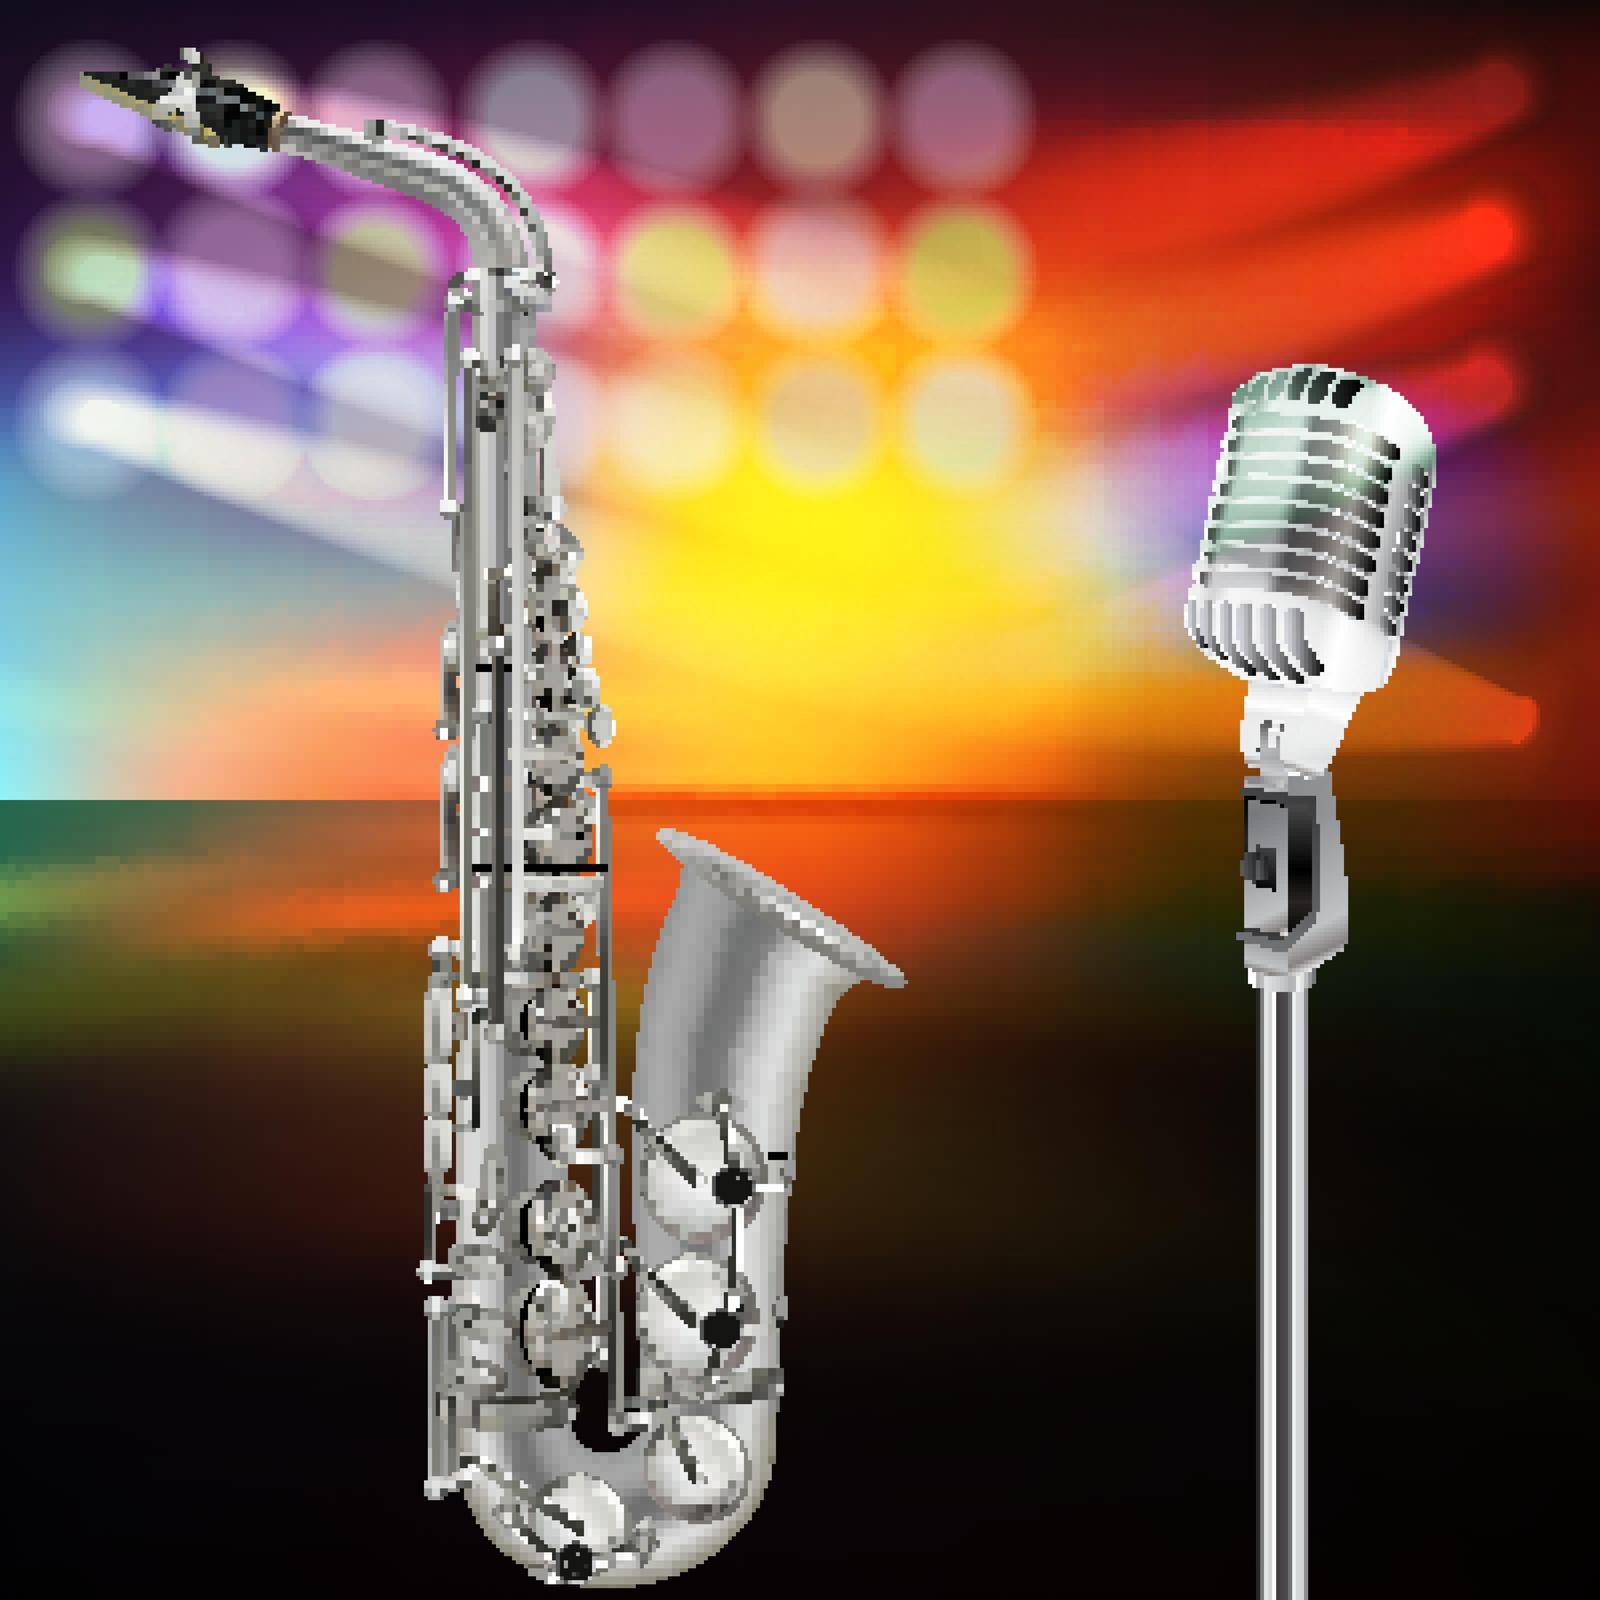 abstract background with saxophone and microphone on music stage